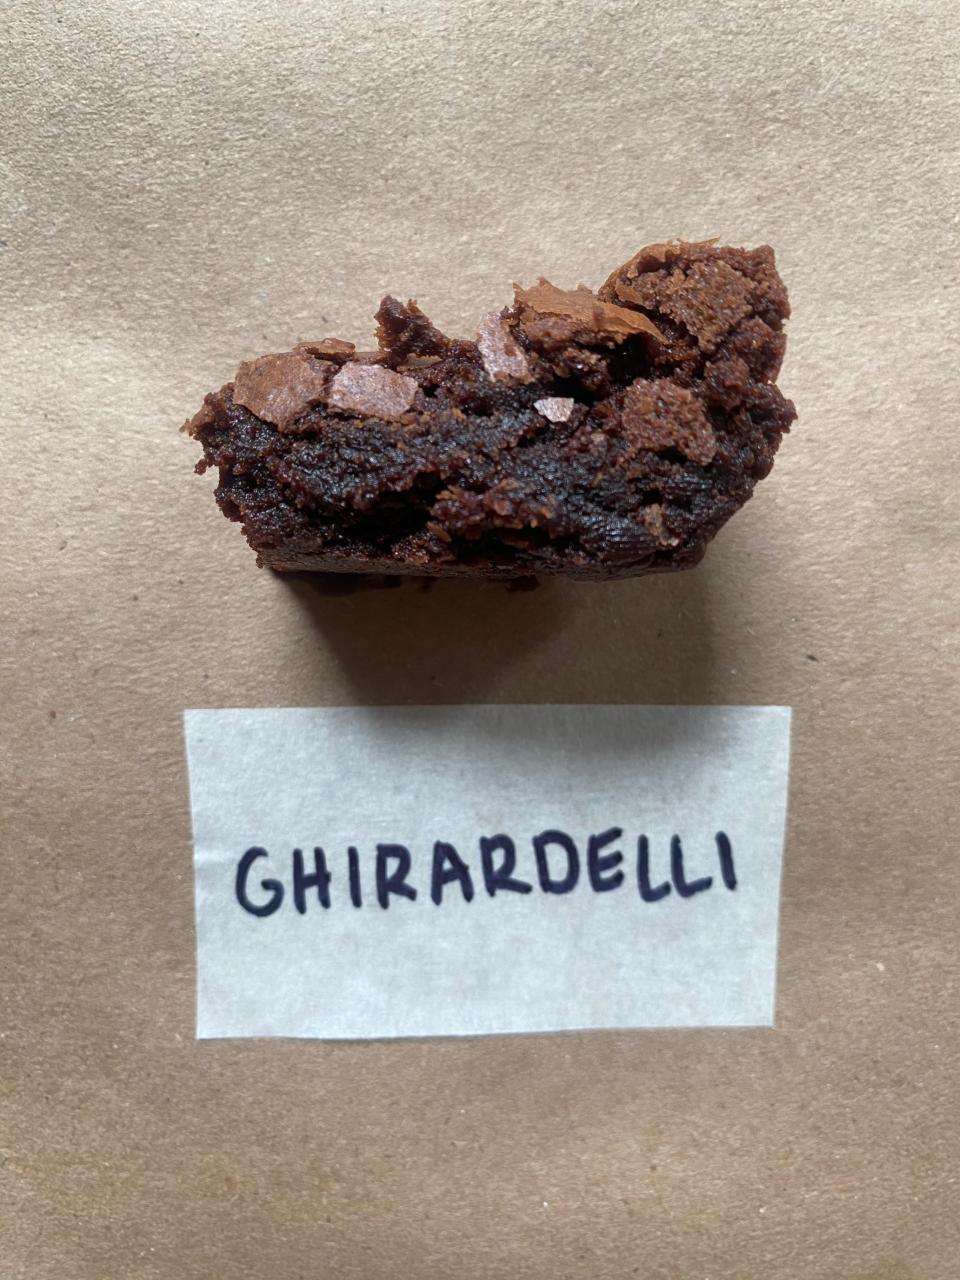 a Ghirardelli brownie that's been cut, exposing the inside texture